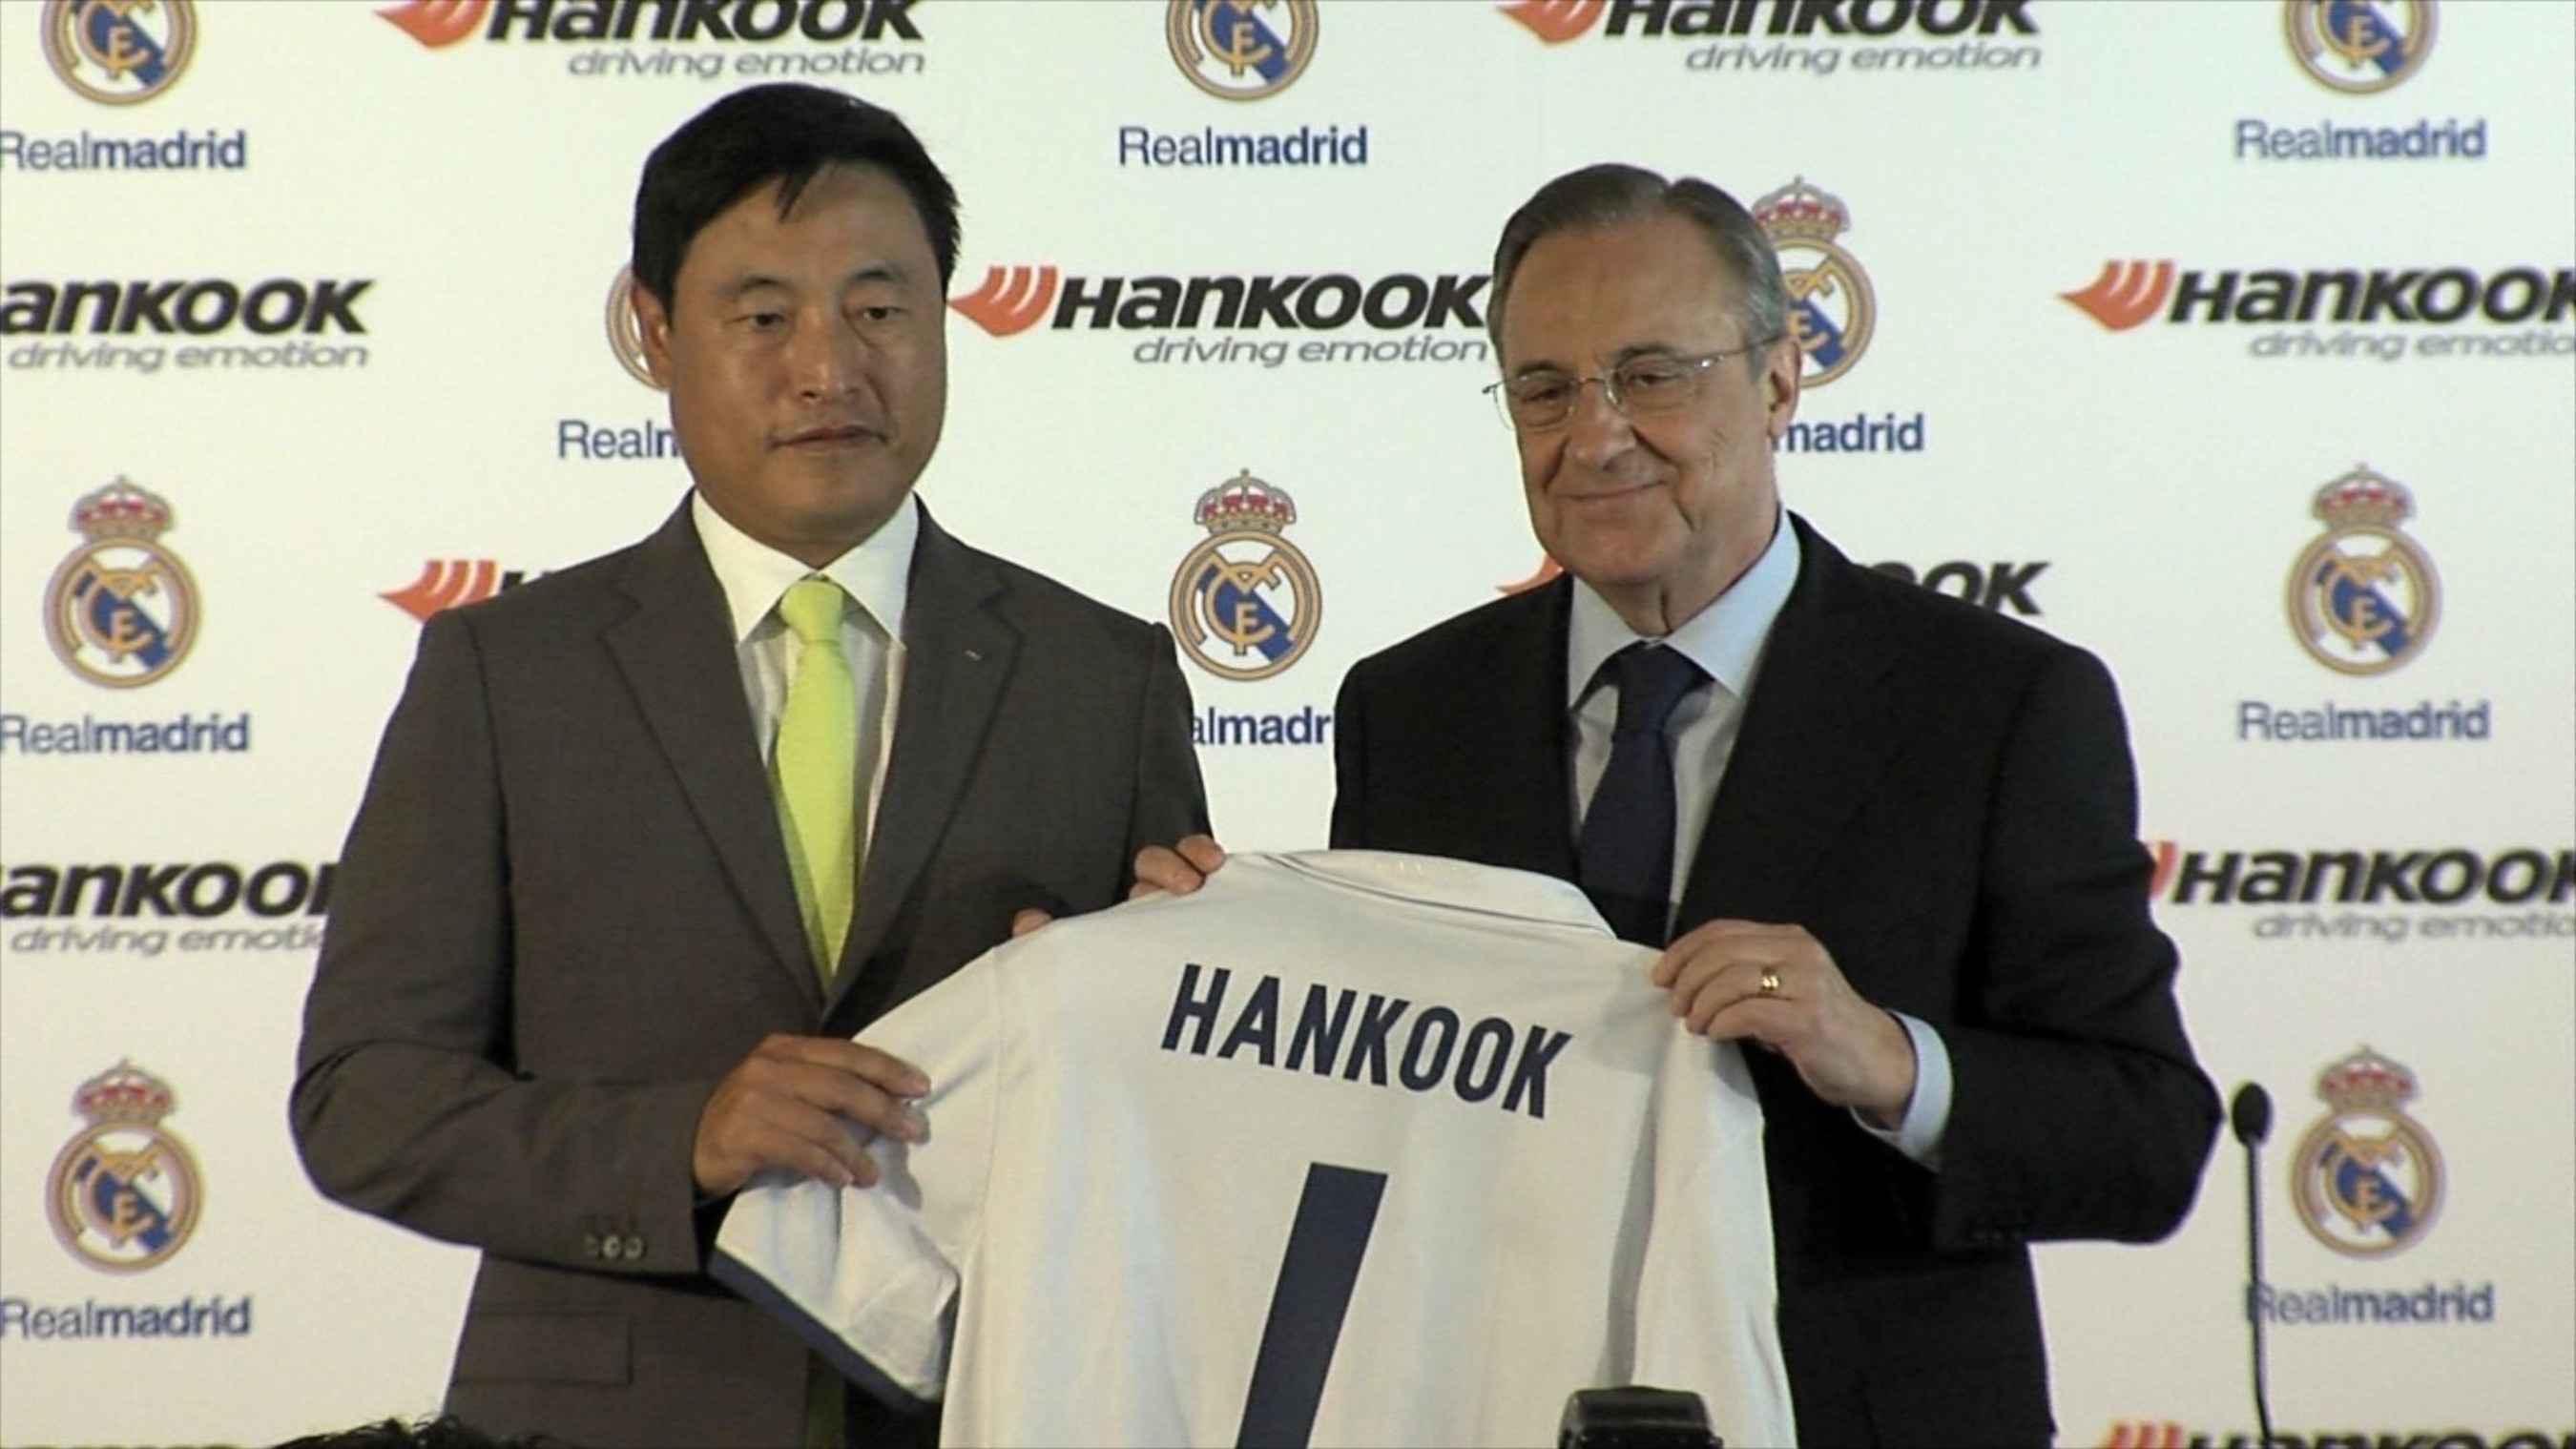 Hankook Tire President and Chief Marketing Officer Hyun Shick Cho and Real Madrid C.F. President Florentino Perez today officially signed their global partnership contract at Santiago Bernabeu stadium. (PRNewsFoto/Hankook Tire Europe GmbH)